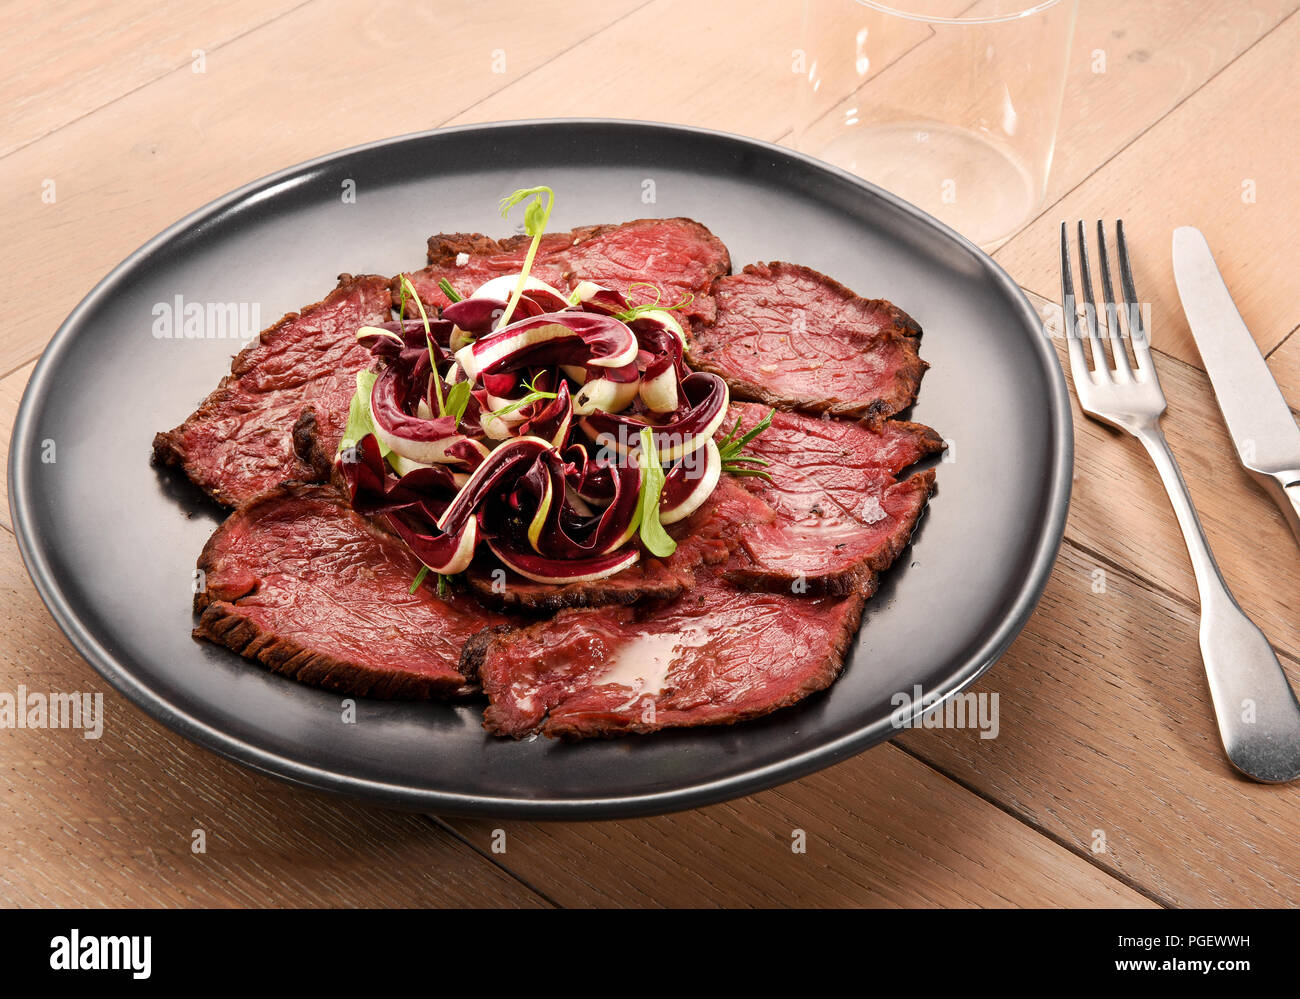 Sliced prime lean roast beef with radicchio salad topping on a black plate with utensils on a wooden table Stock Photo